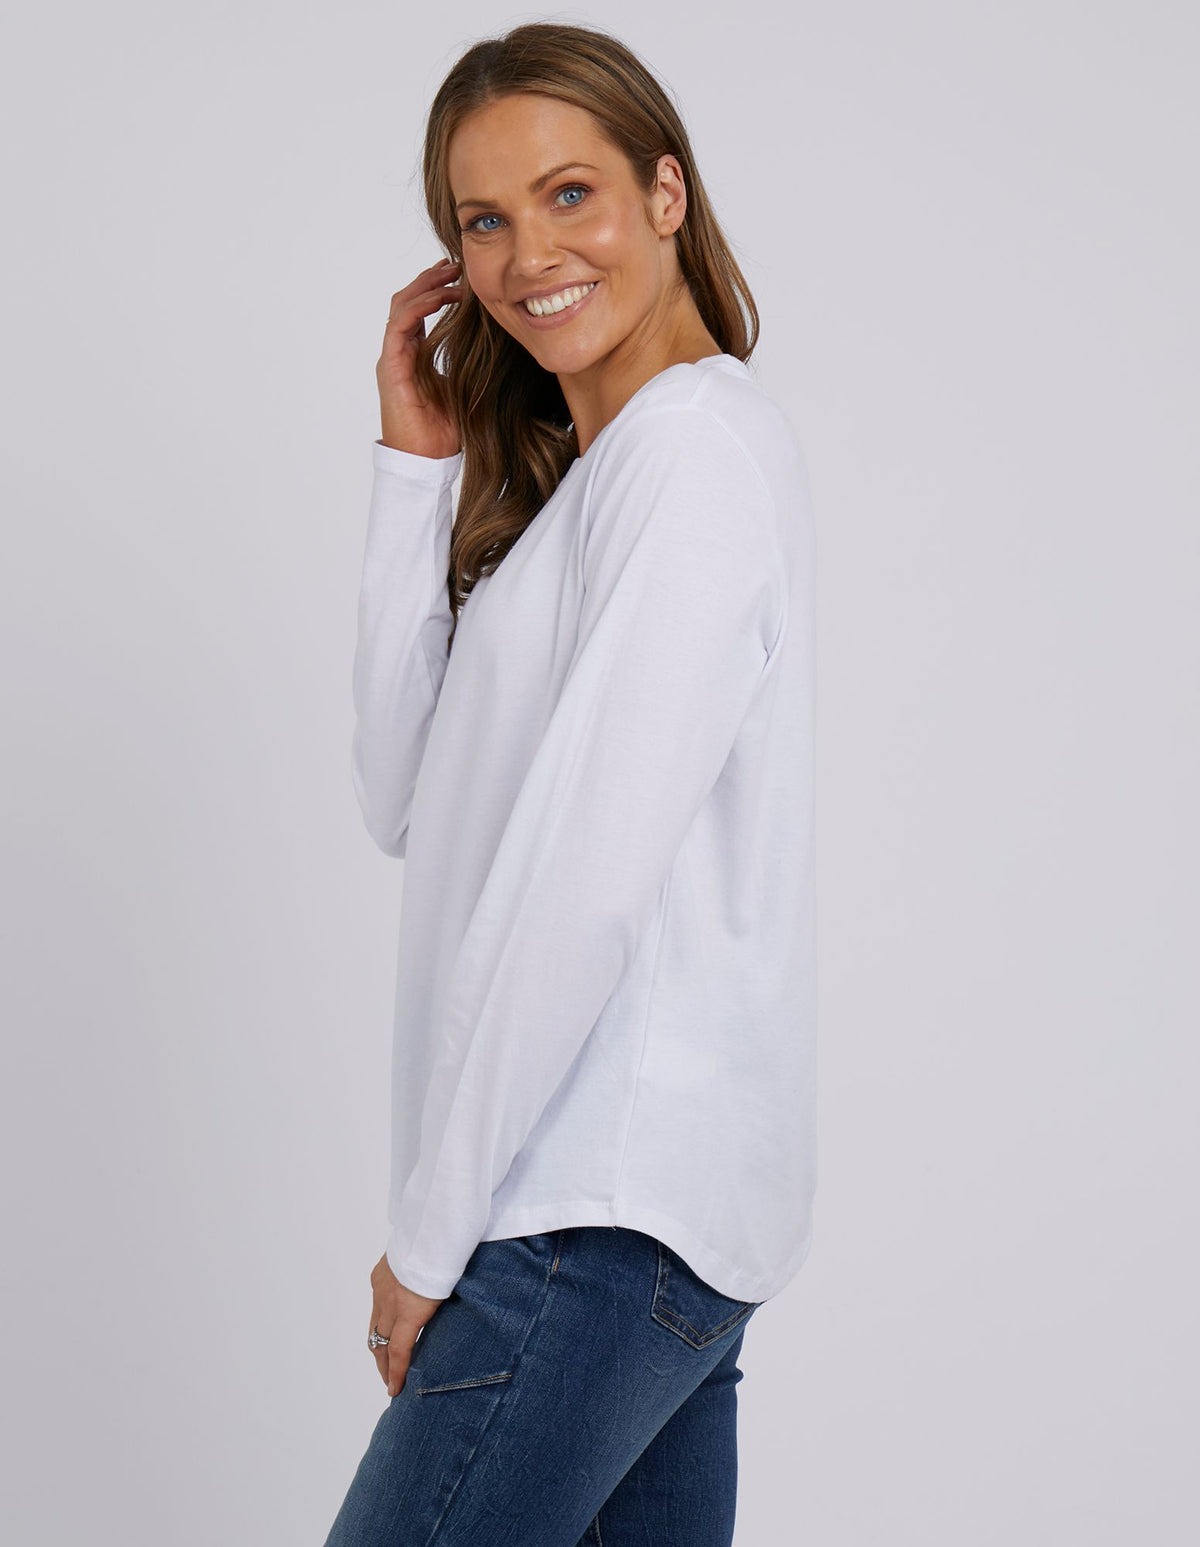 Manly Long Sleeve Tee - White - Foxwood - FUDGE Gifts Home Lifestyle